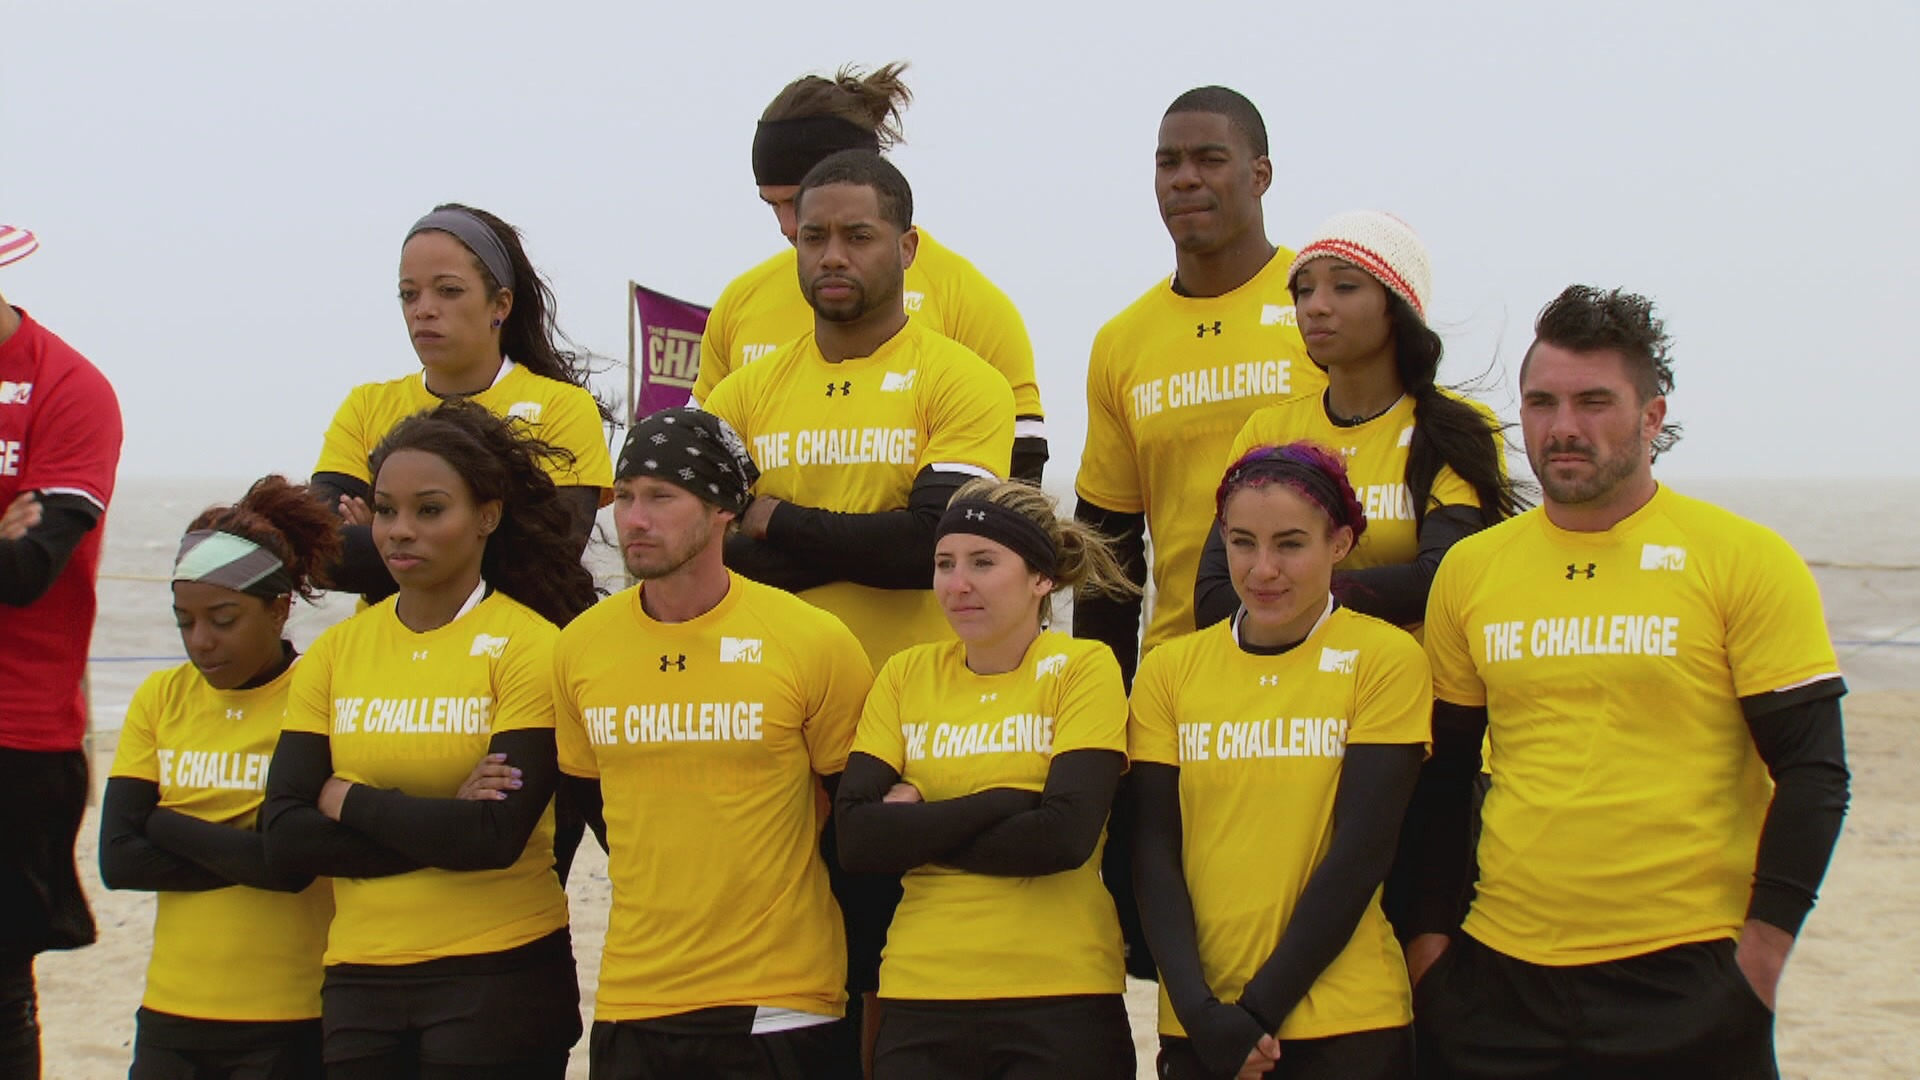 Watch The Challenge Season 25 Episode 4 Power Coupling Full show on